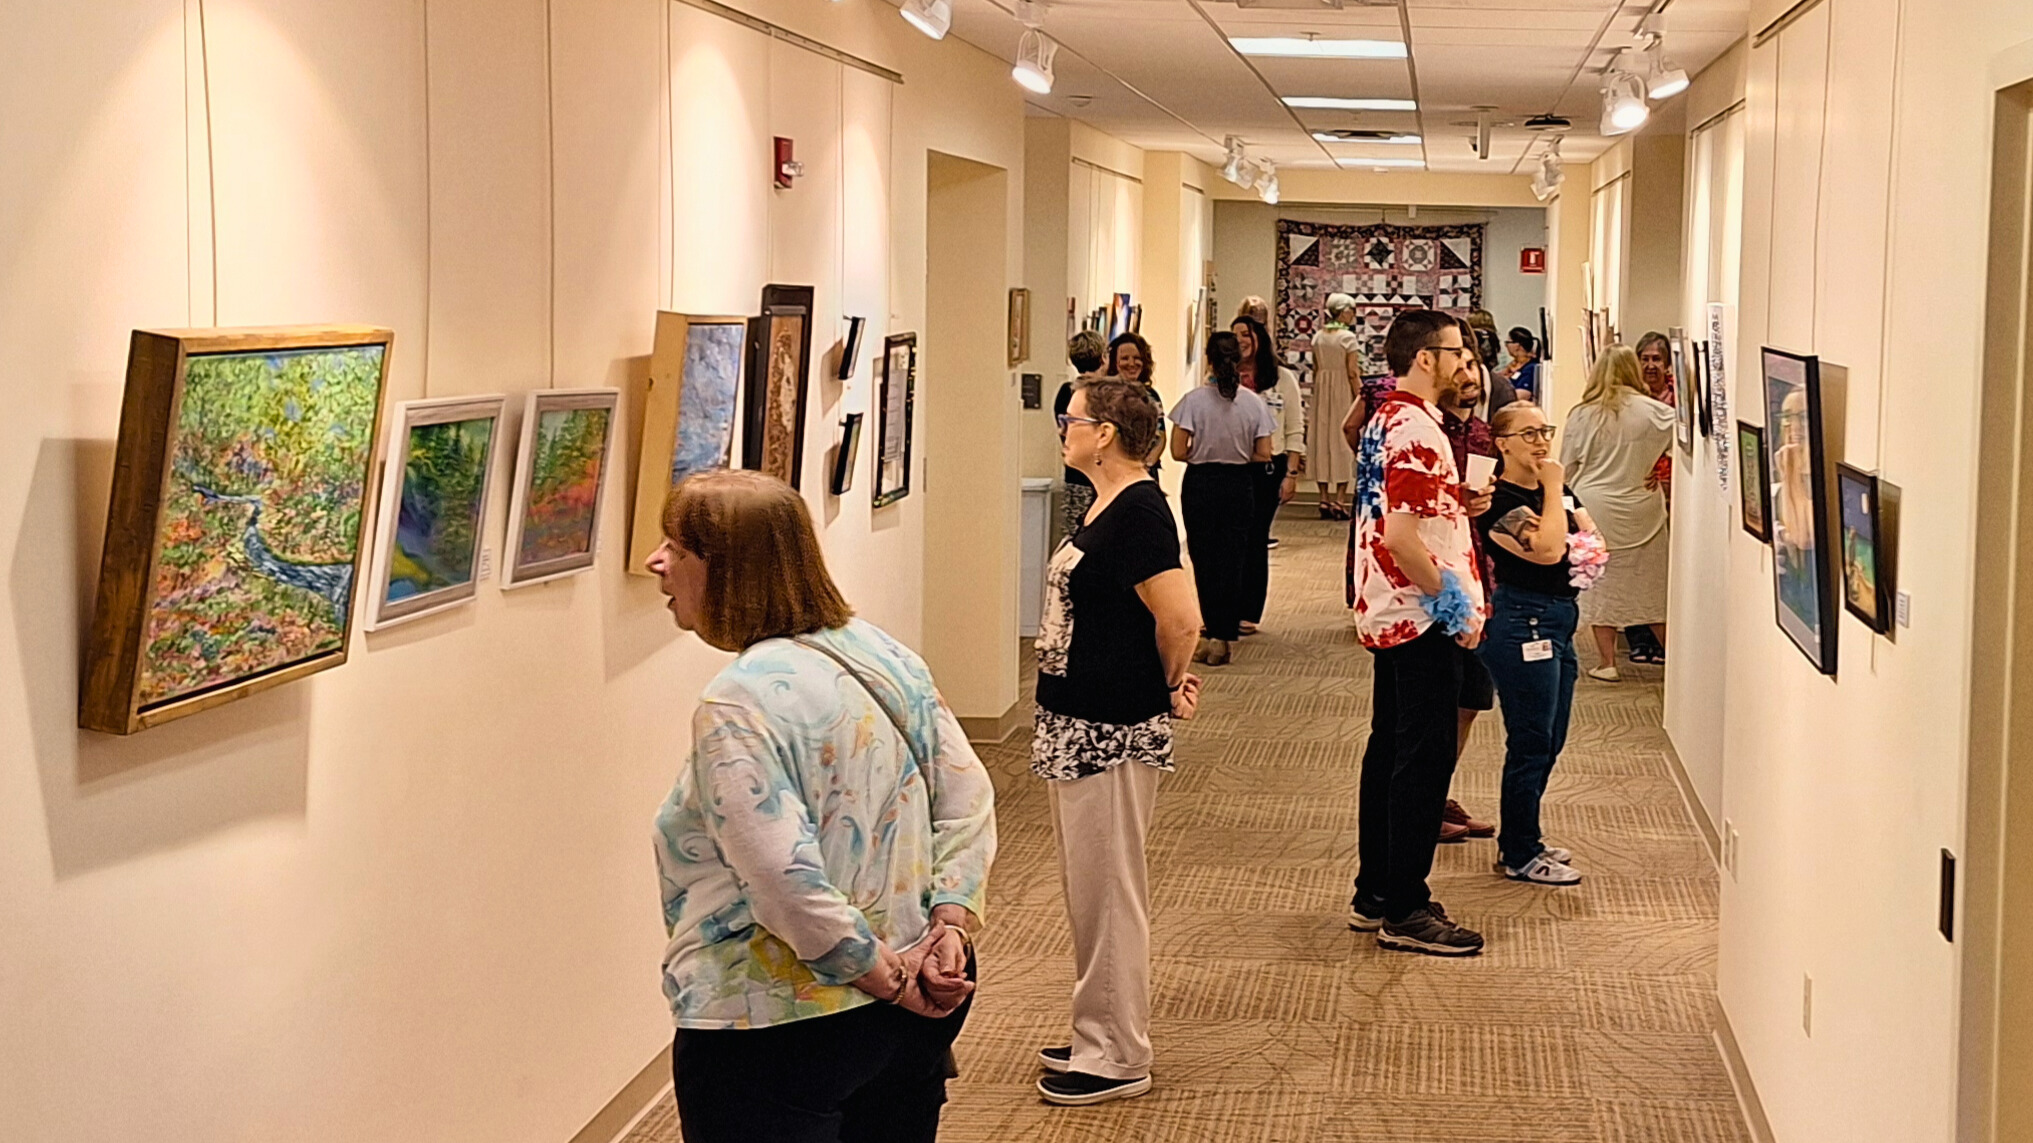 A hallway in Monadnock Community Hospital displaying various pieces of artwork. Several people are observing the art, including paintings and framed pictures, which are hung on the walls. The atmosphere is lively, with individuals engaged in conversation and appreciating the exhibits. The lighting is warm, enhancing the colors and details of the artwork. The setting is inviting, showcasing the hospital's support for local artists and the community's cultural engagement.